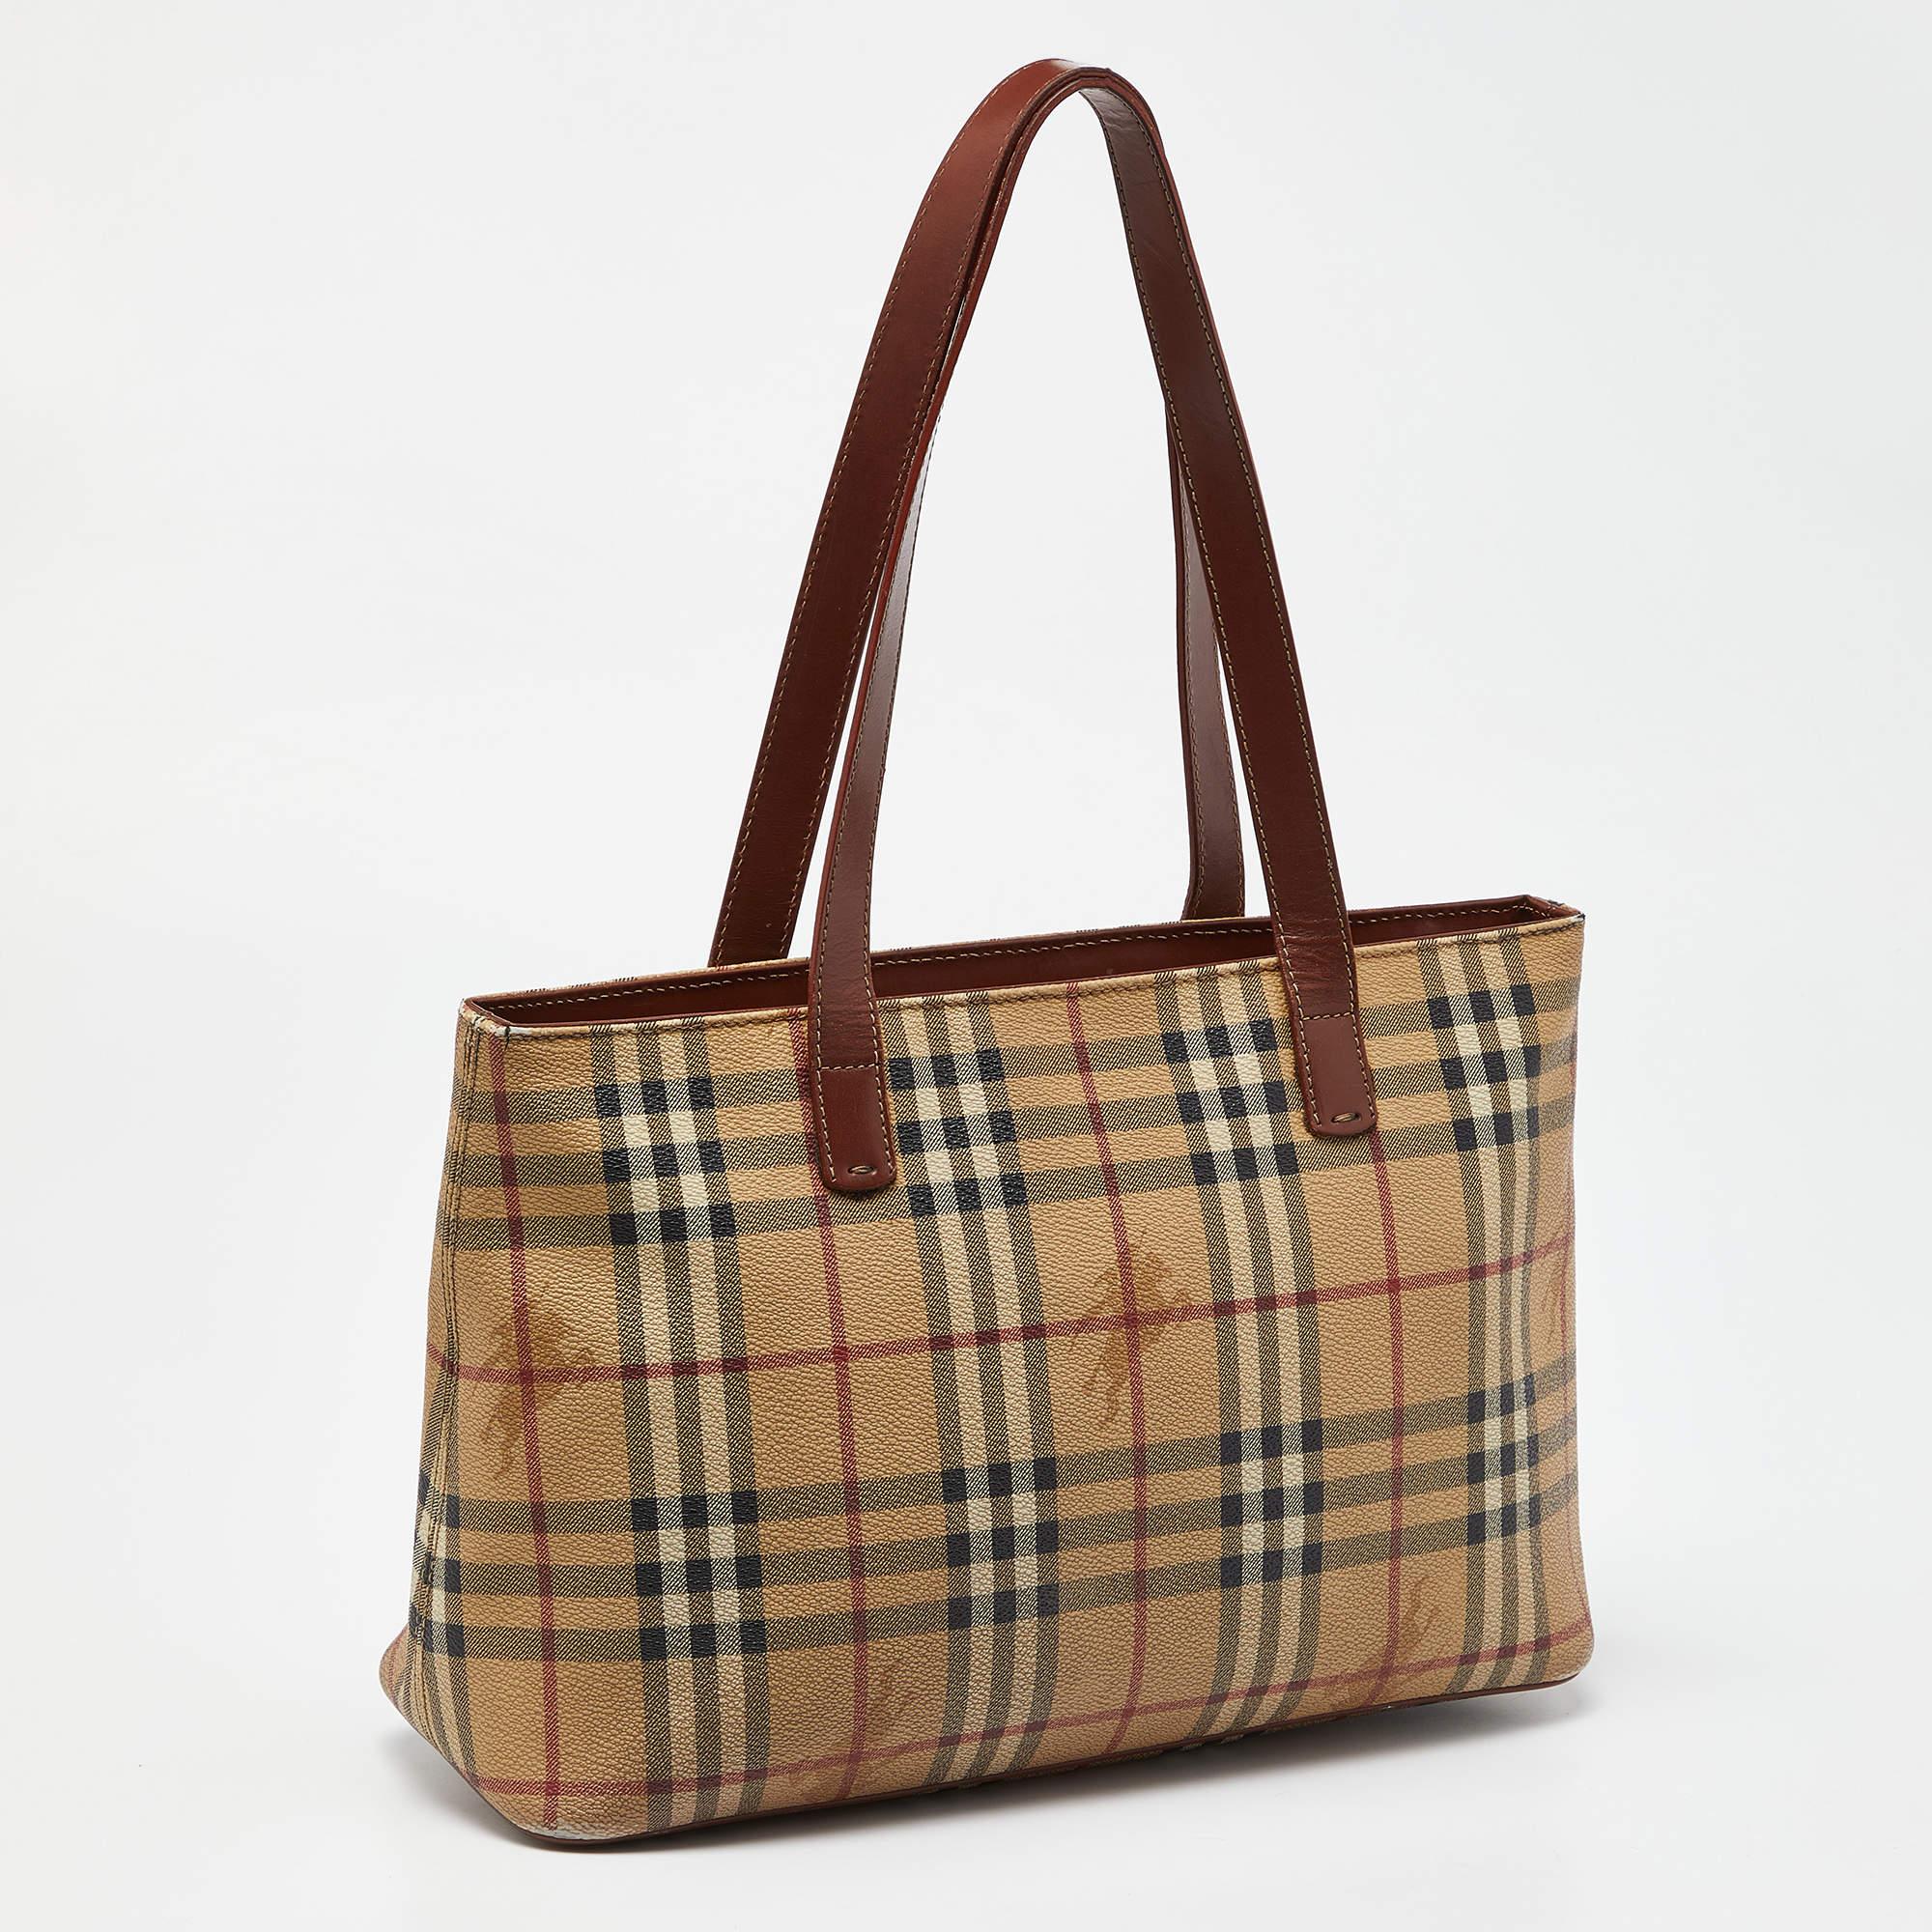 Created from high-quality materials, this tote is enriched with functional and classic elements. It can be carried around conveniently, and its interior is perfectly sized to keep your belongings with ease.

